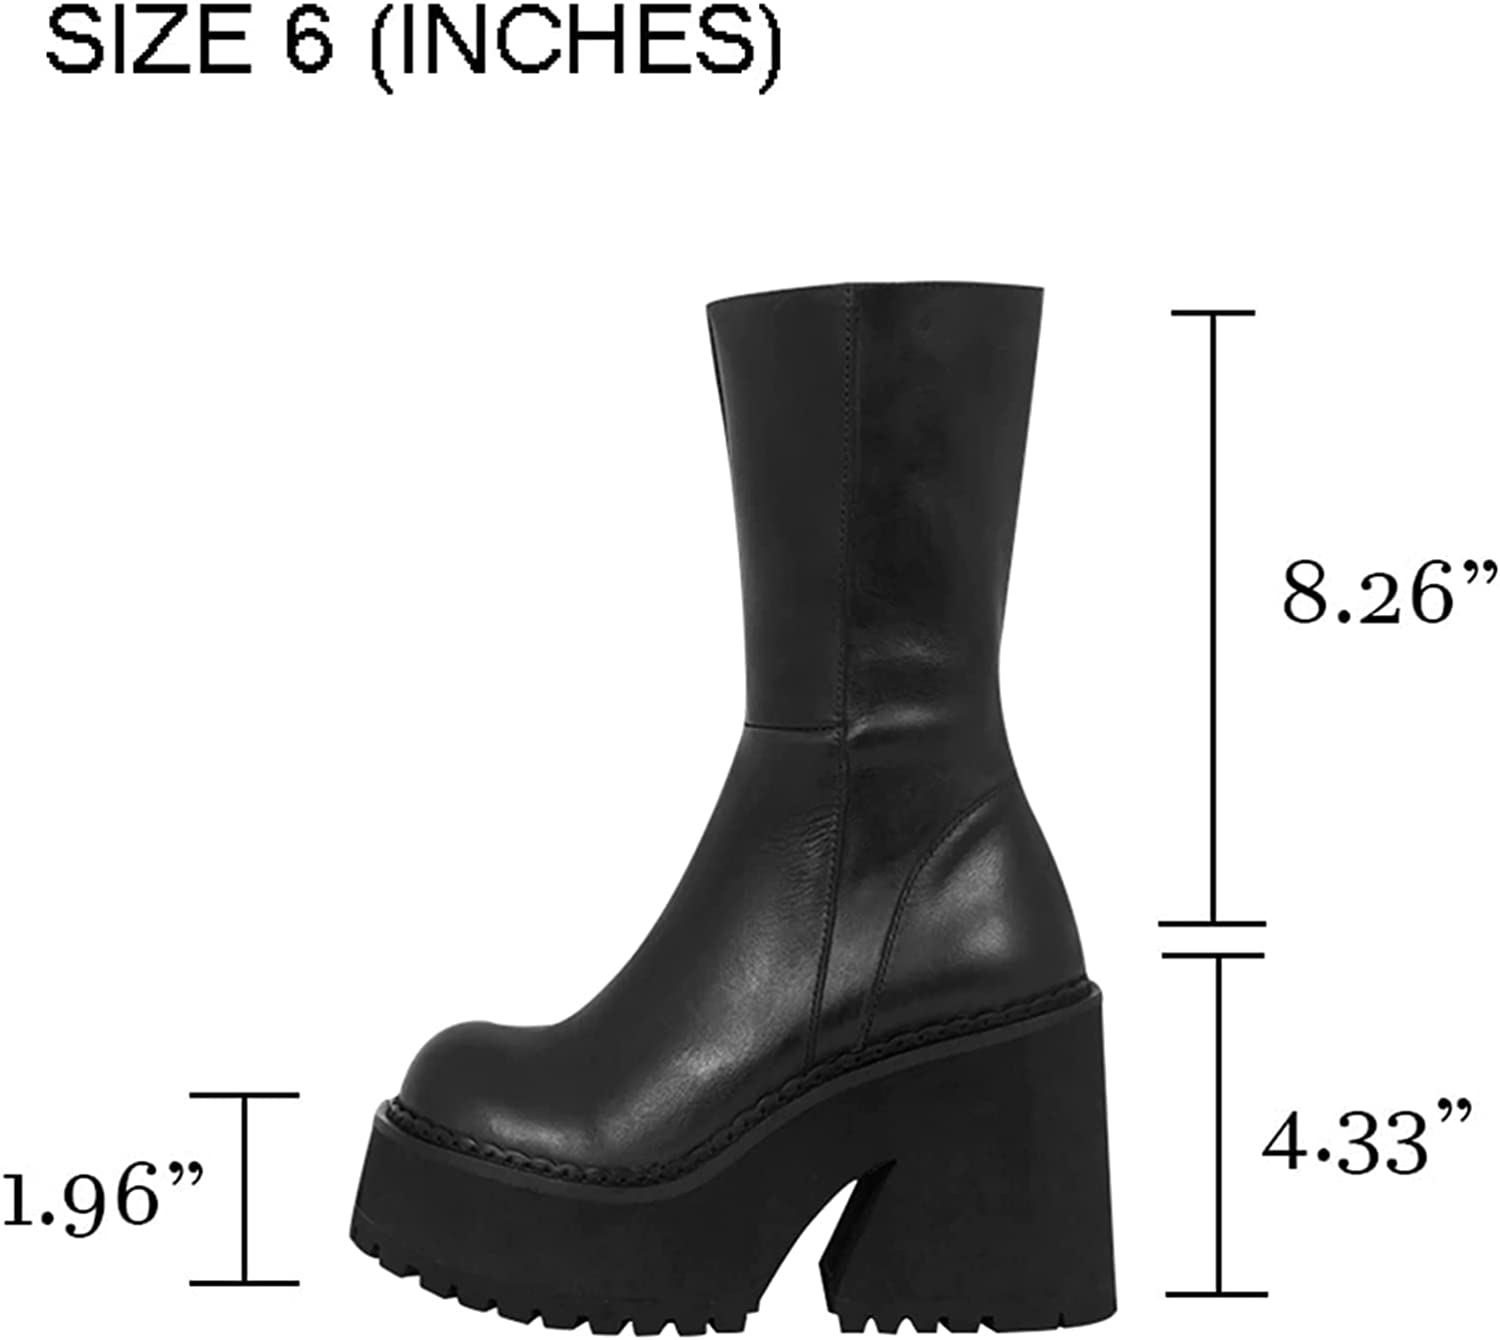 AMINUGAL Womens Wedge Heel Ankle Boots Platform Zipper Punk Motorcycle Booties Chunky Block High Heel Round Toe Fashion Work Combat Boots Mid Calf For Women